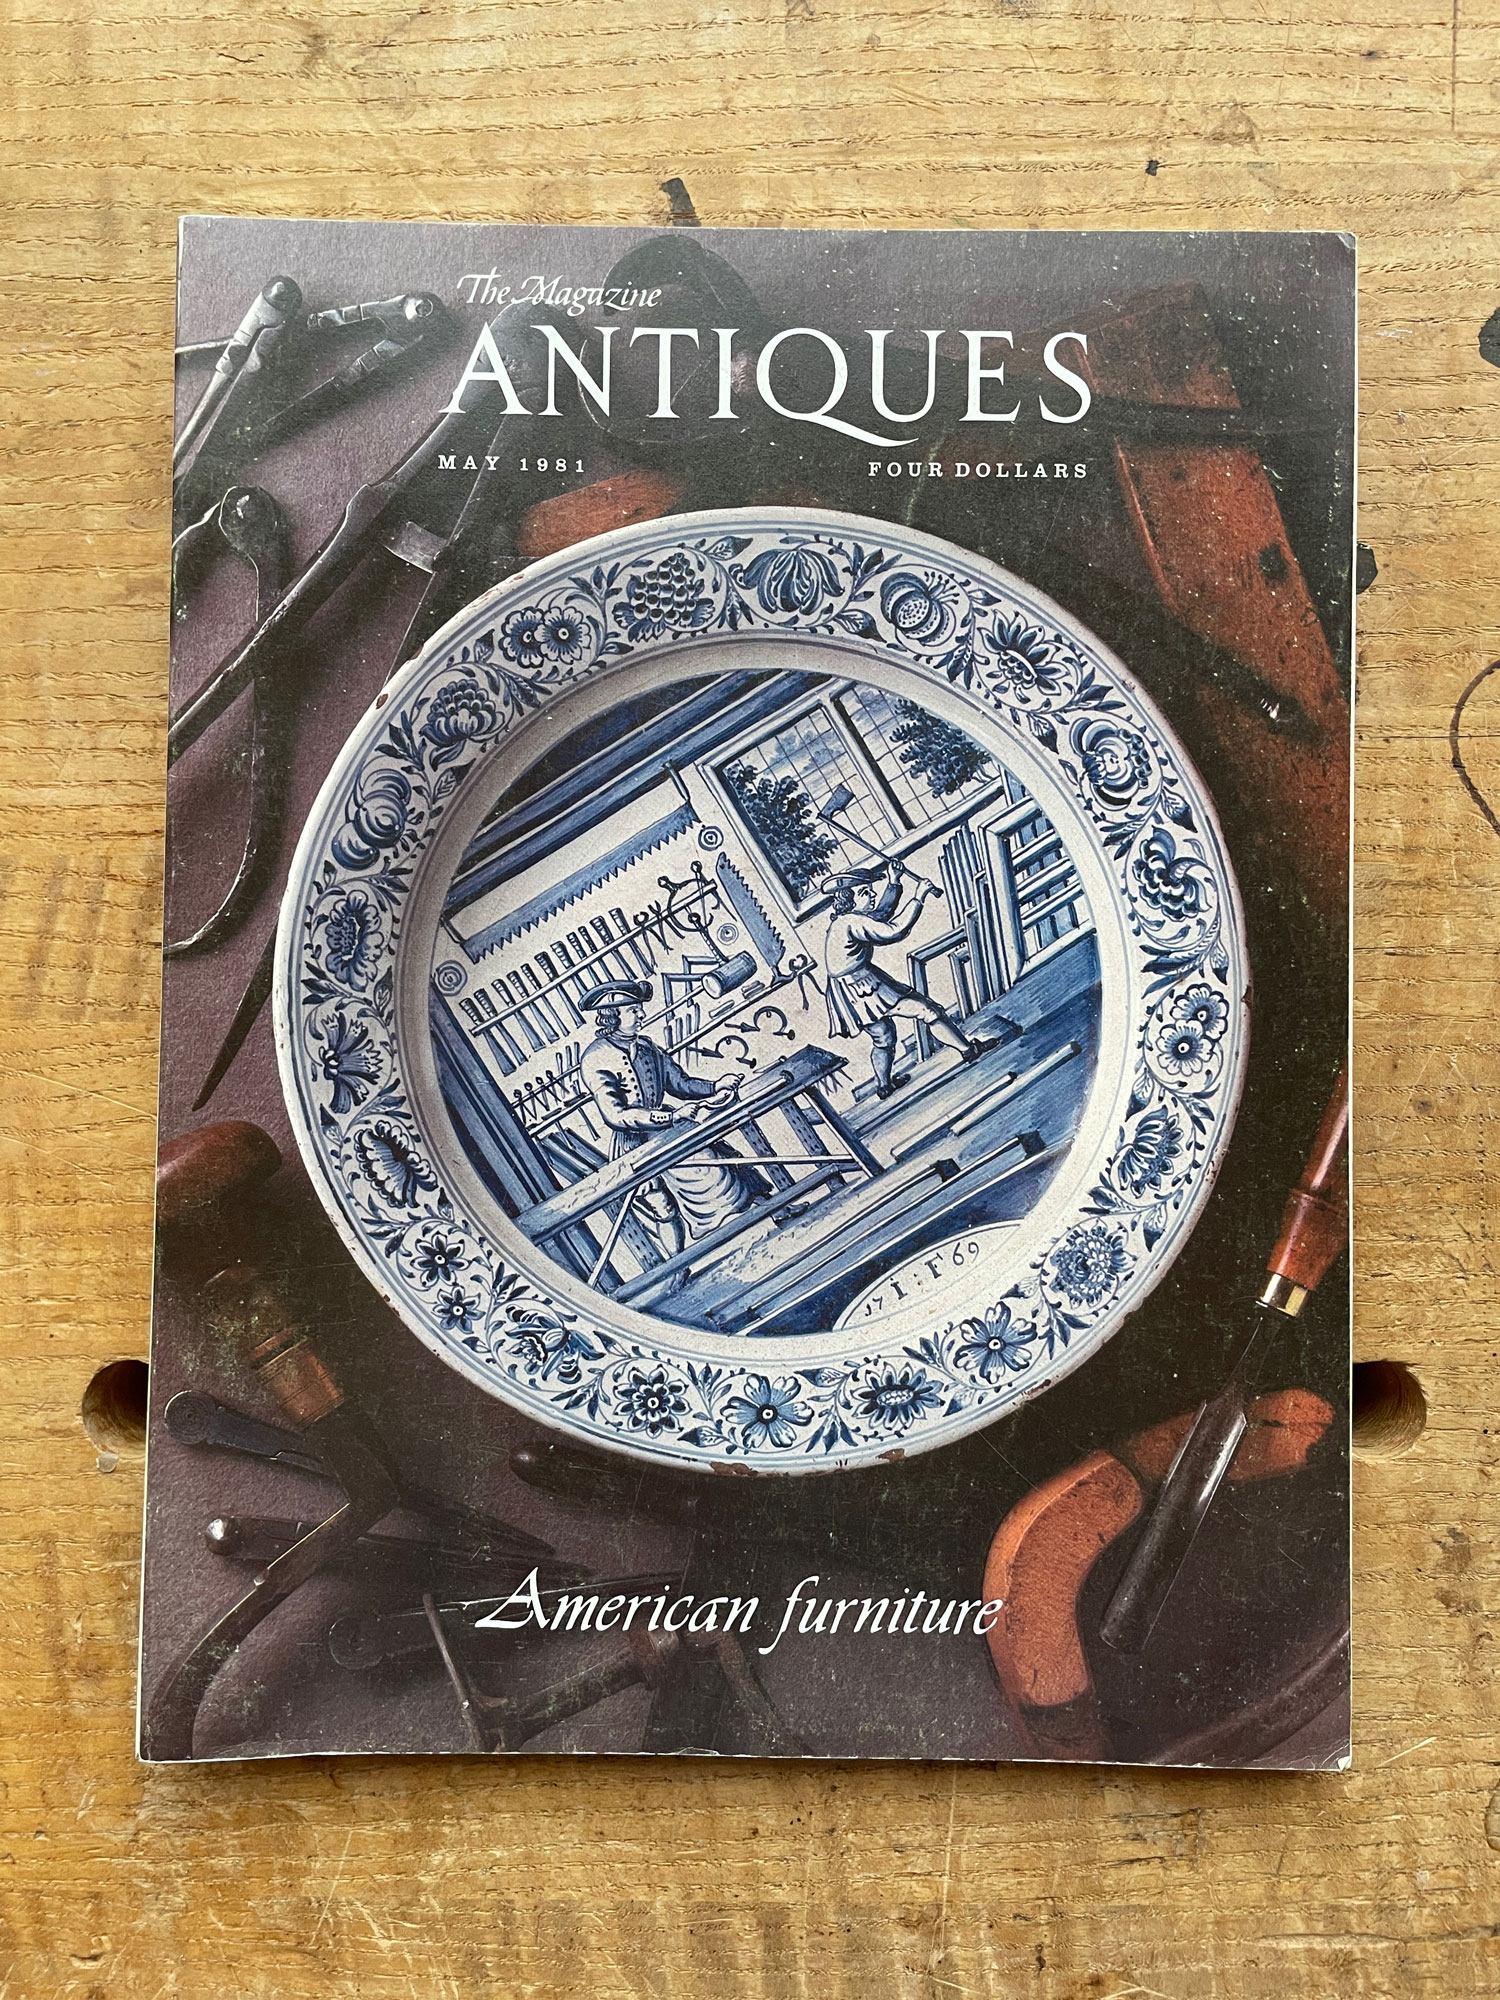 The front cover of the May 1981 The Magazine Antiques featuring a delft plate of a woodworking scene